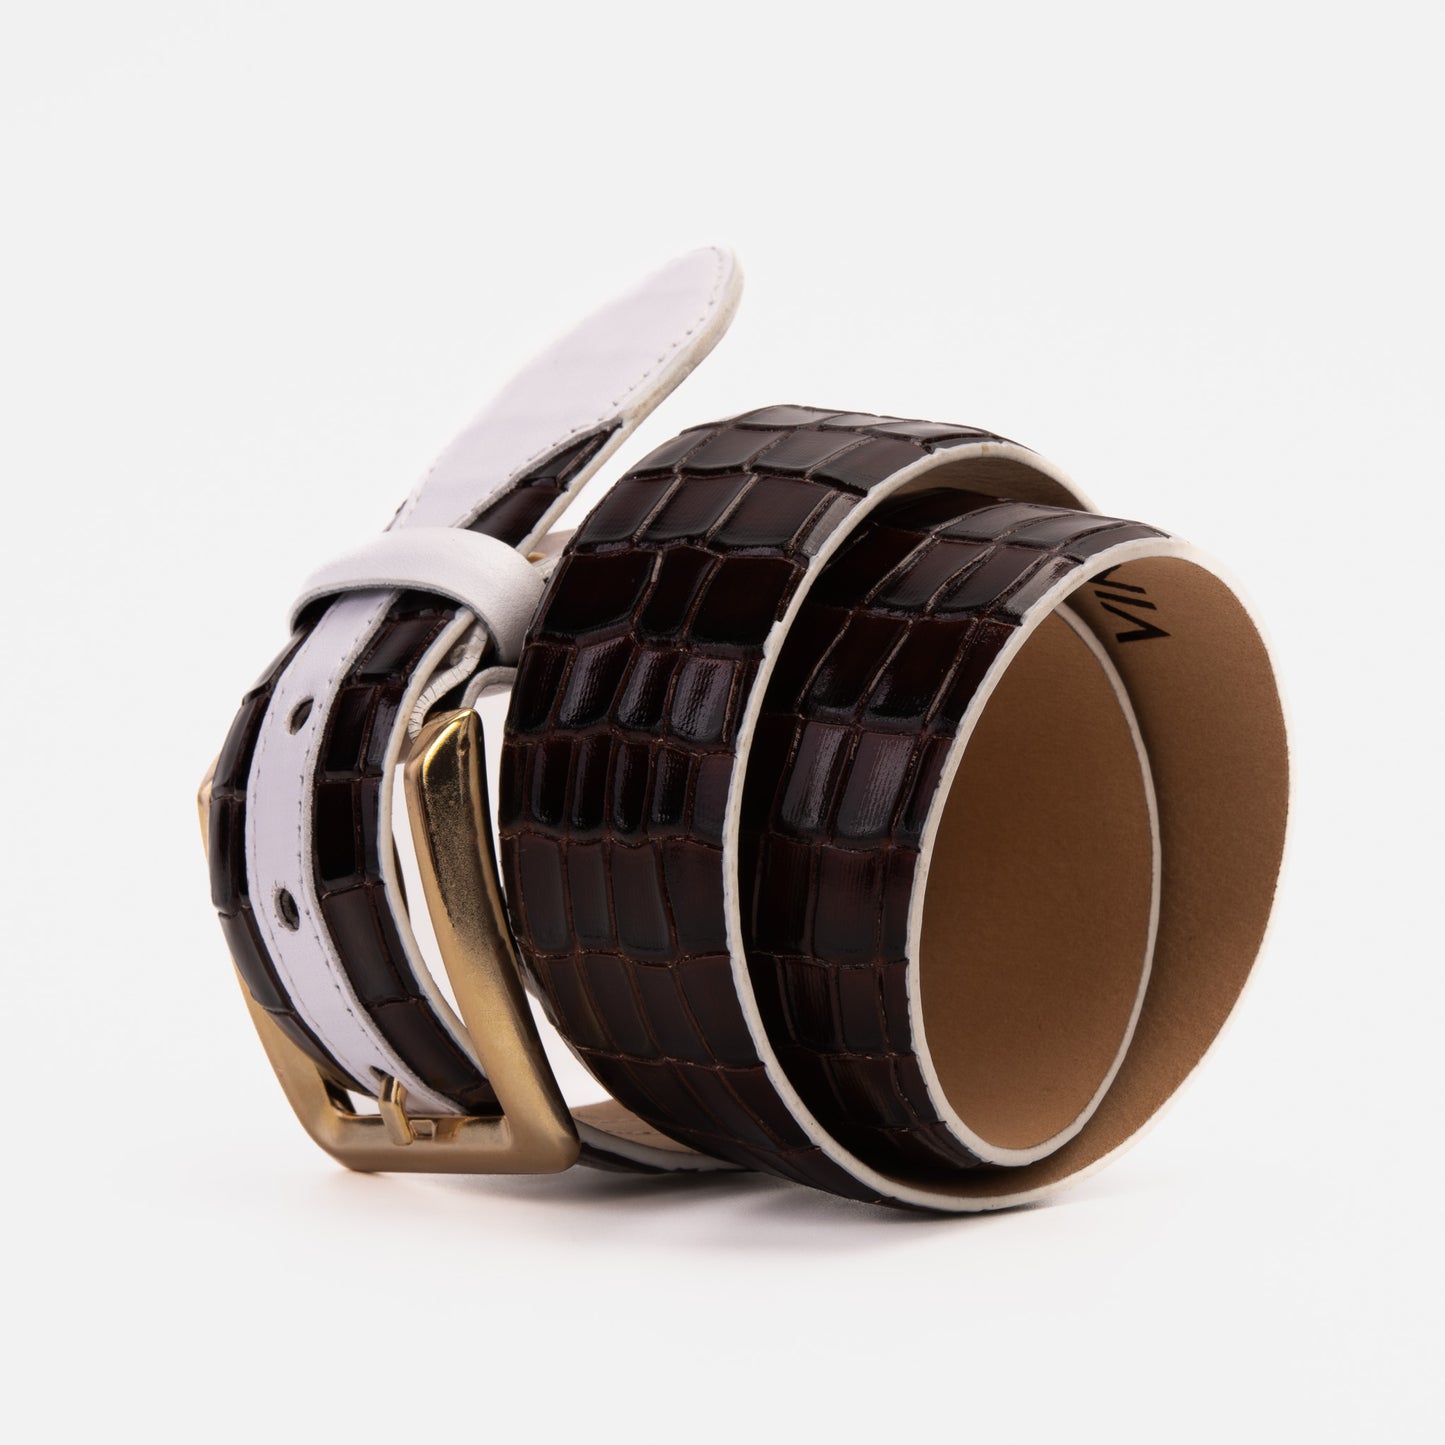 The Bellagio Brown & White Leather Belt